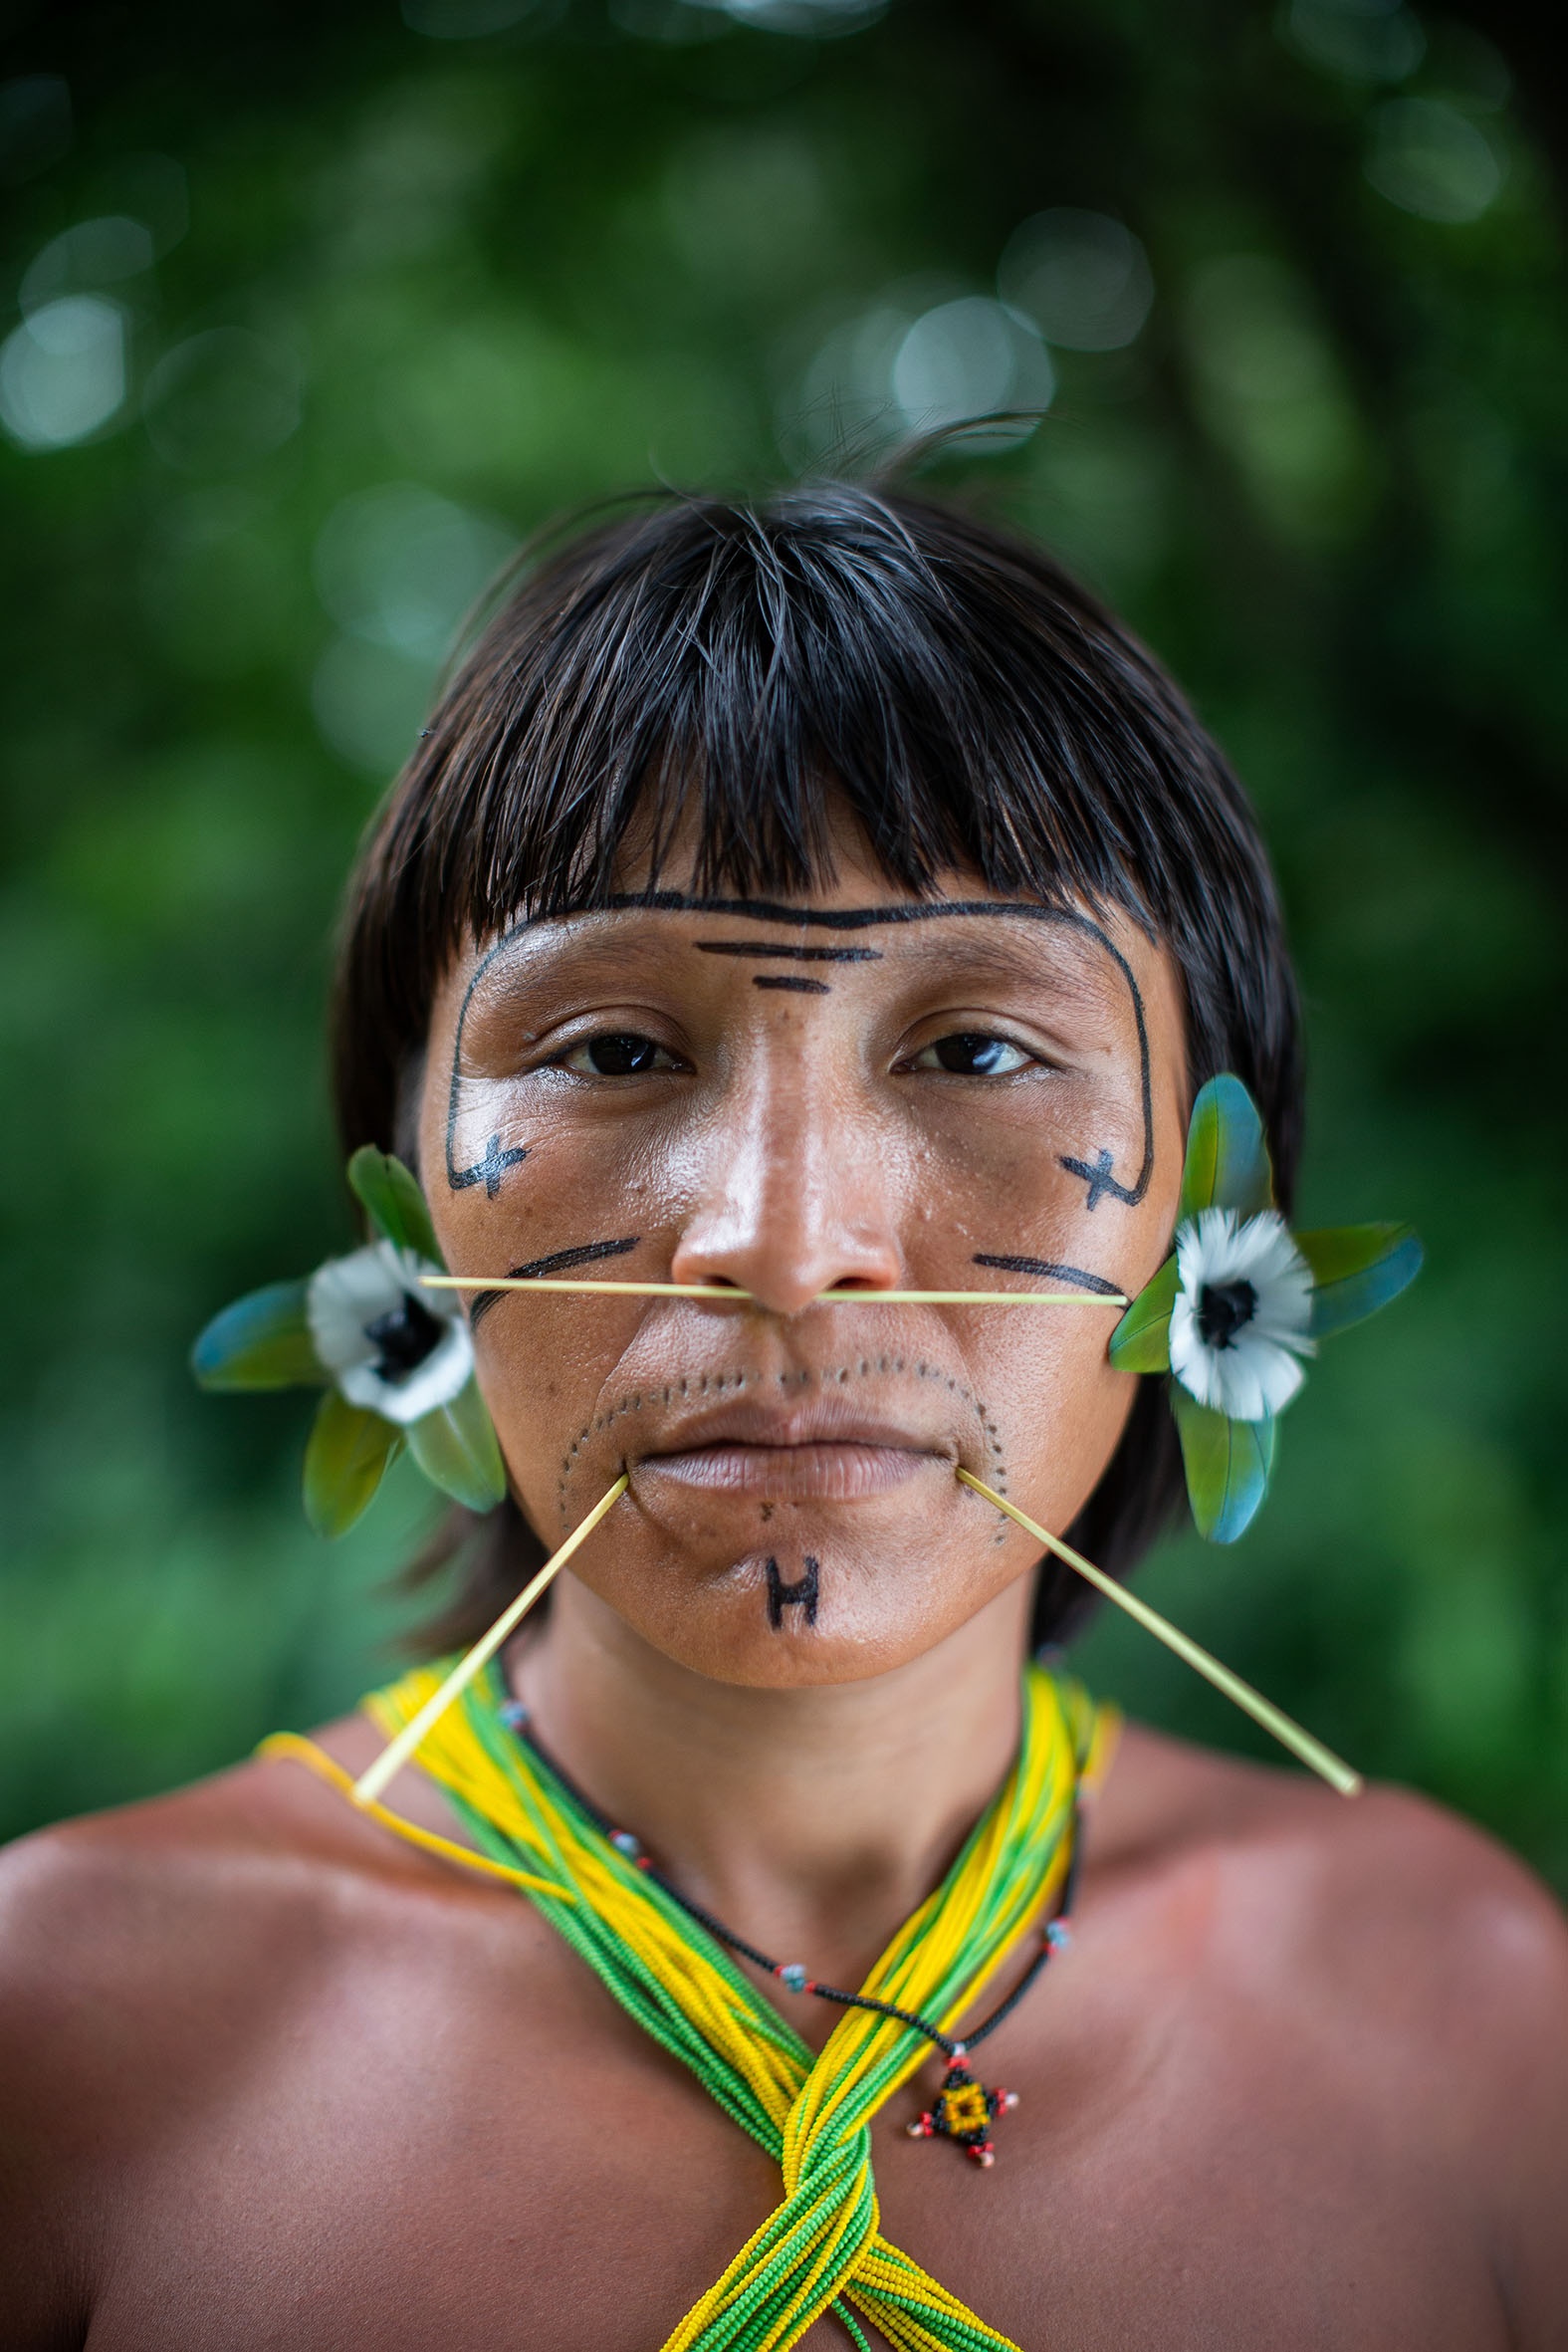 A portrait of artist Ehuana Yaira. An Indigenous Yanomami woman, Ehuana is seen from the shoulders up. She wears a garment whose green and yellow straps cross over her chest and around her neck. She has dark hair in straight bangs across her forehead. She has a long, straight piercing through the septum of her nose and wears a blue flower in her hair tucked behind either ear.